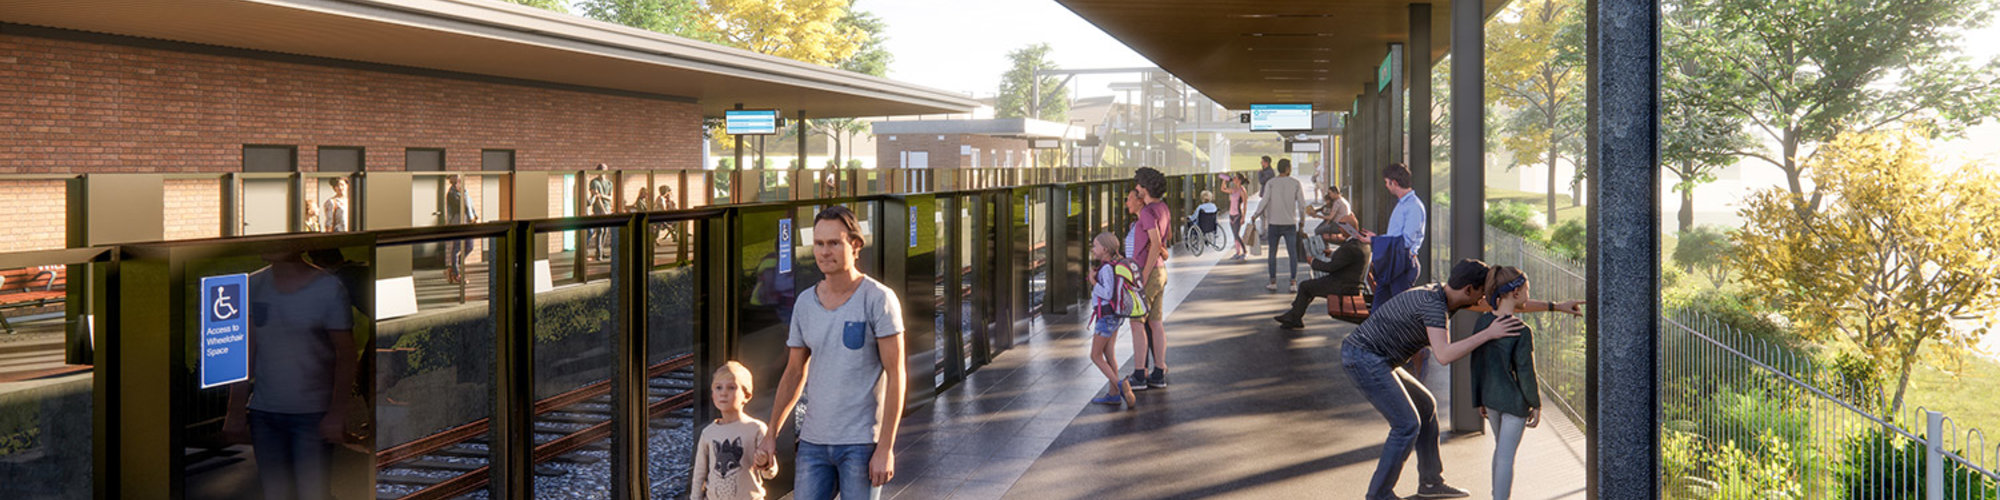 An artist's impression of the future metro station at Wiley Park as viewed from the platform, being delivered as part of the Sydney Metro City & Southwest project.